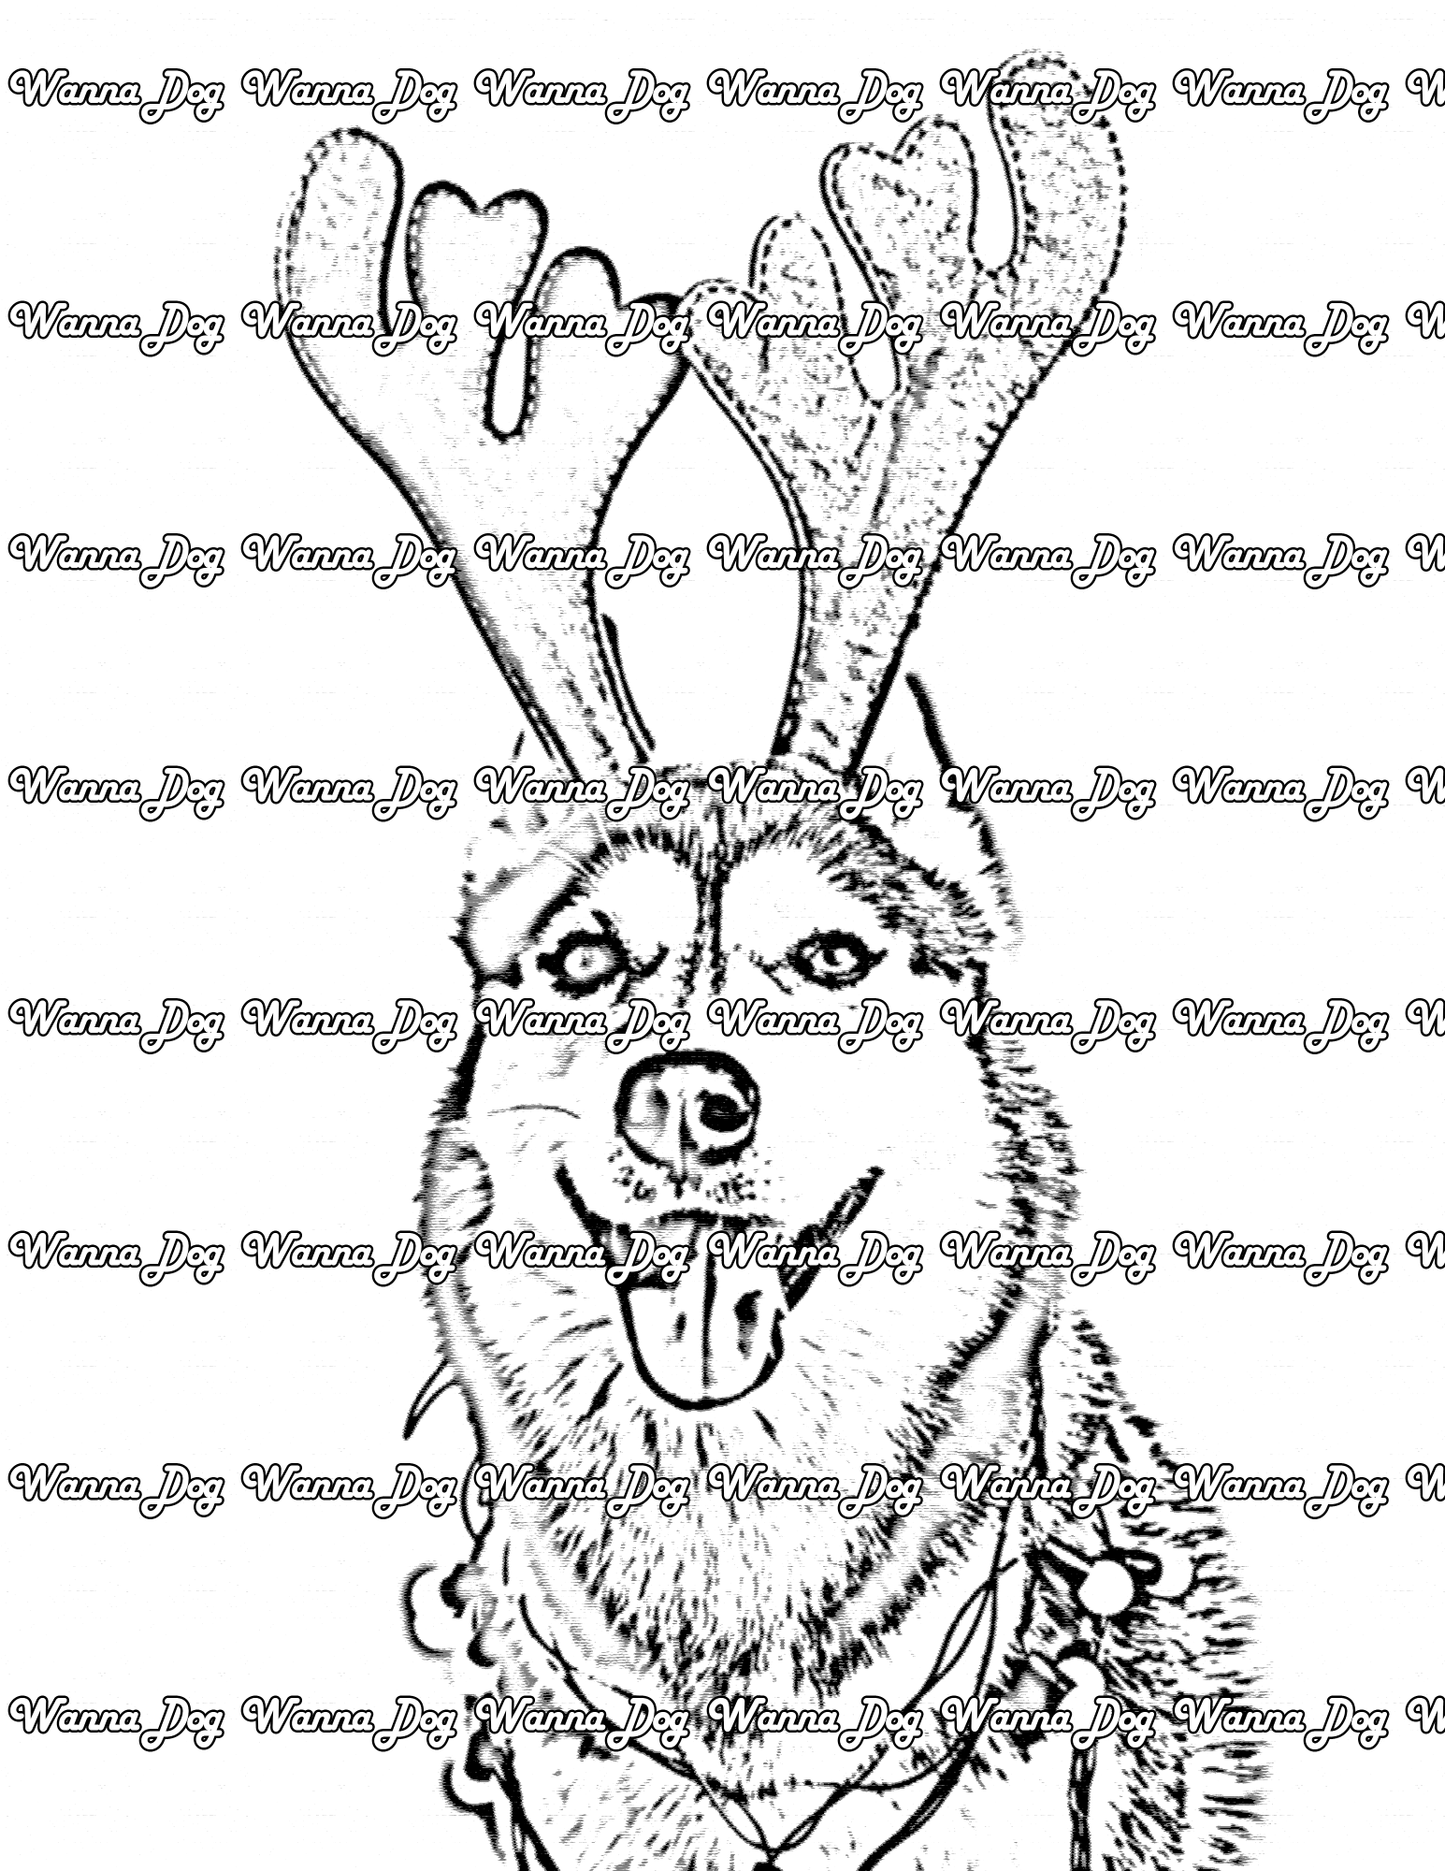 Siberian Husky Coloring Page of a Siberian Husky wearing antlers and smiling